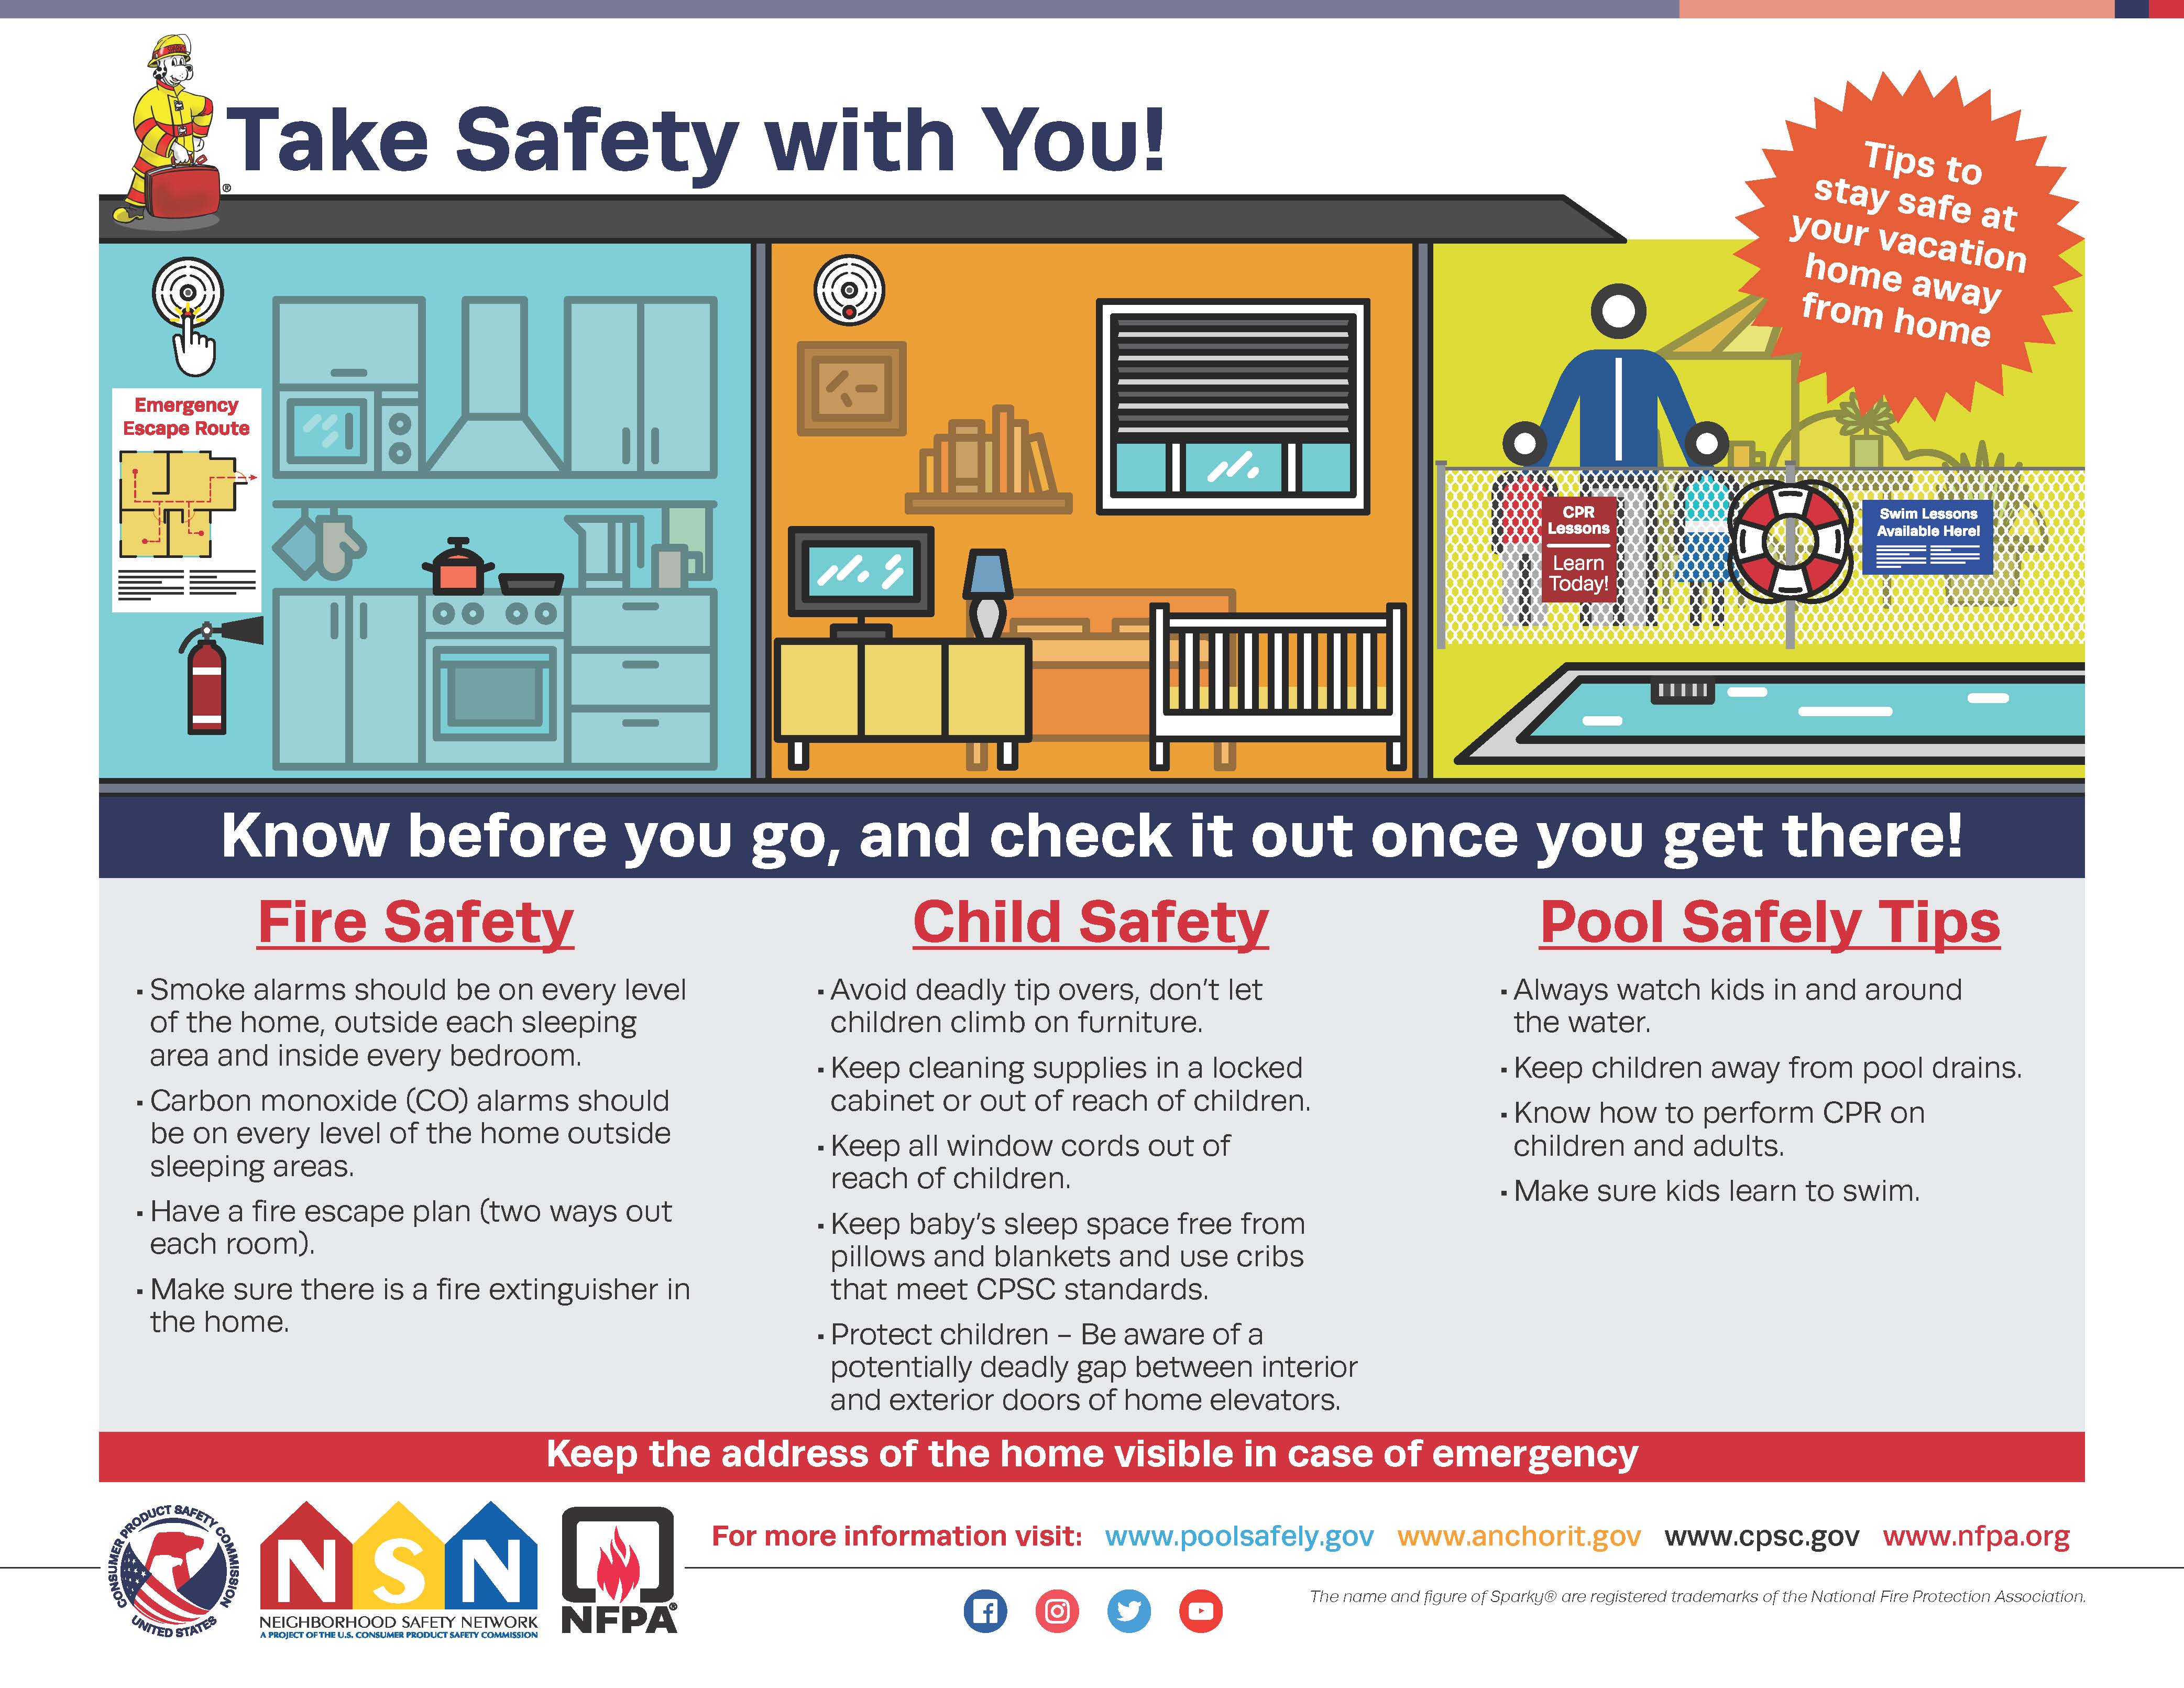 Some  products are reportedly fire hazards - Check your home